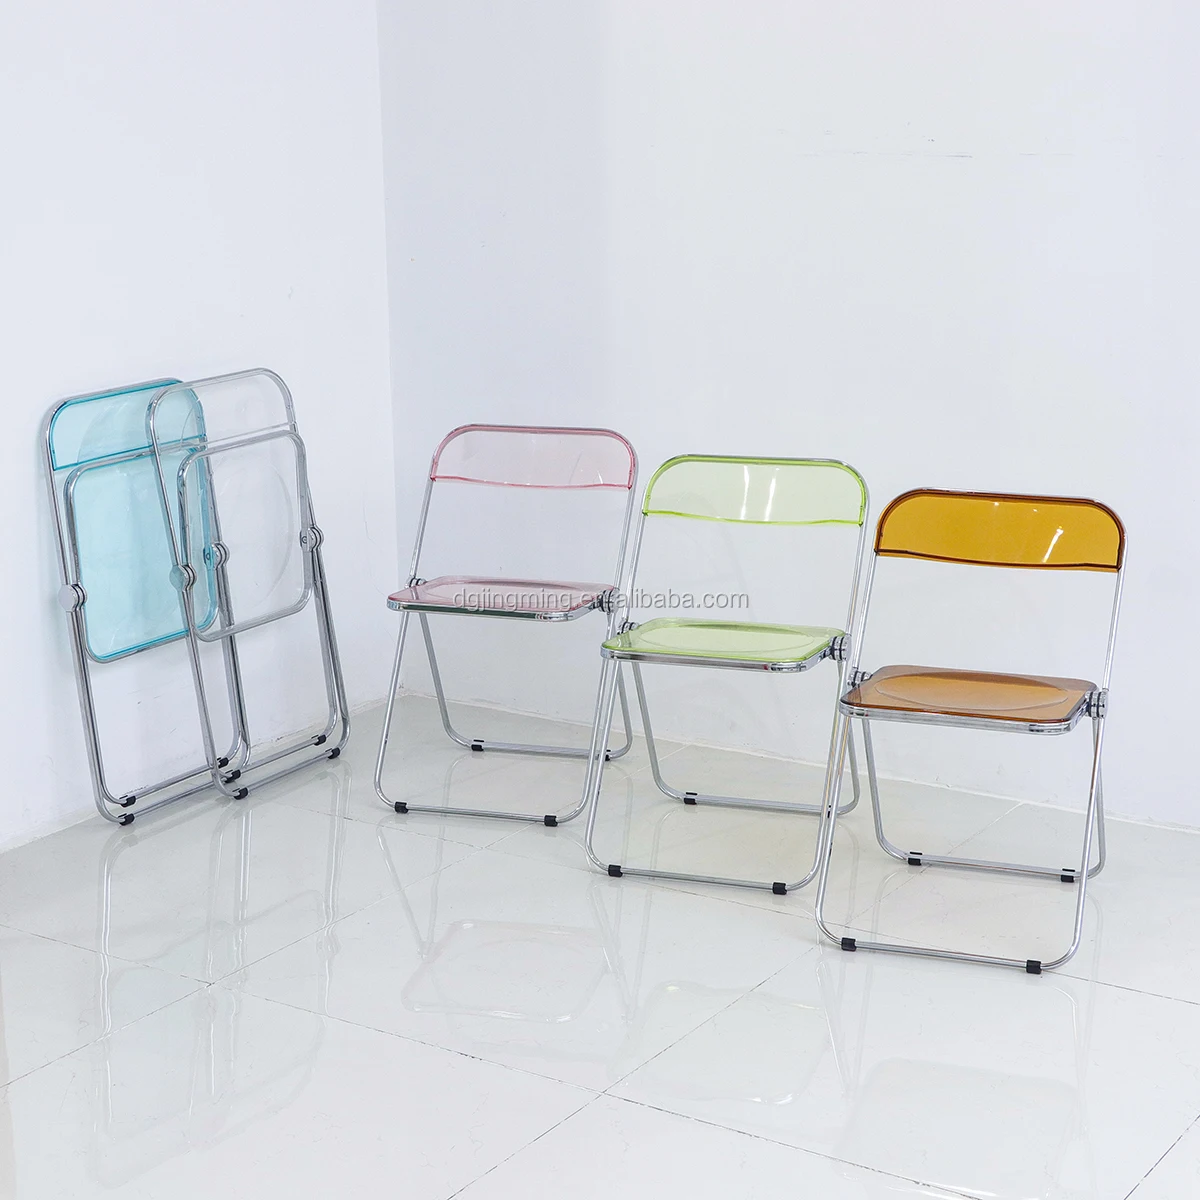 Clear Acrylic Folding Chairs Pc Transparent Plastic Chairs Buy Clear Acrylic Folding Chairs